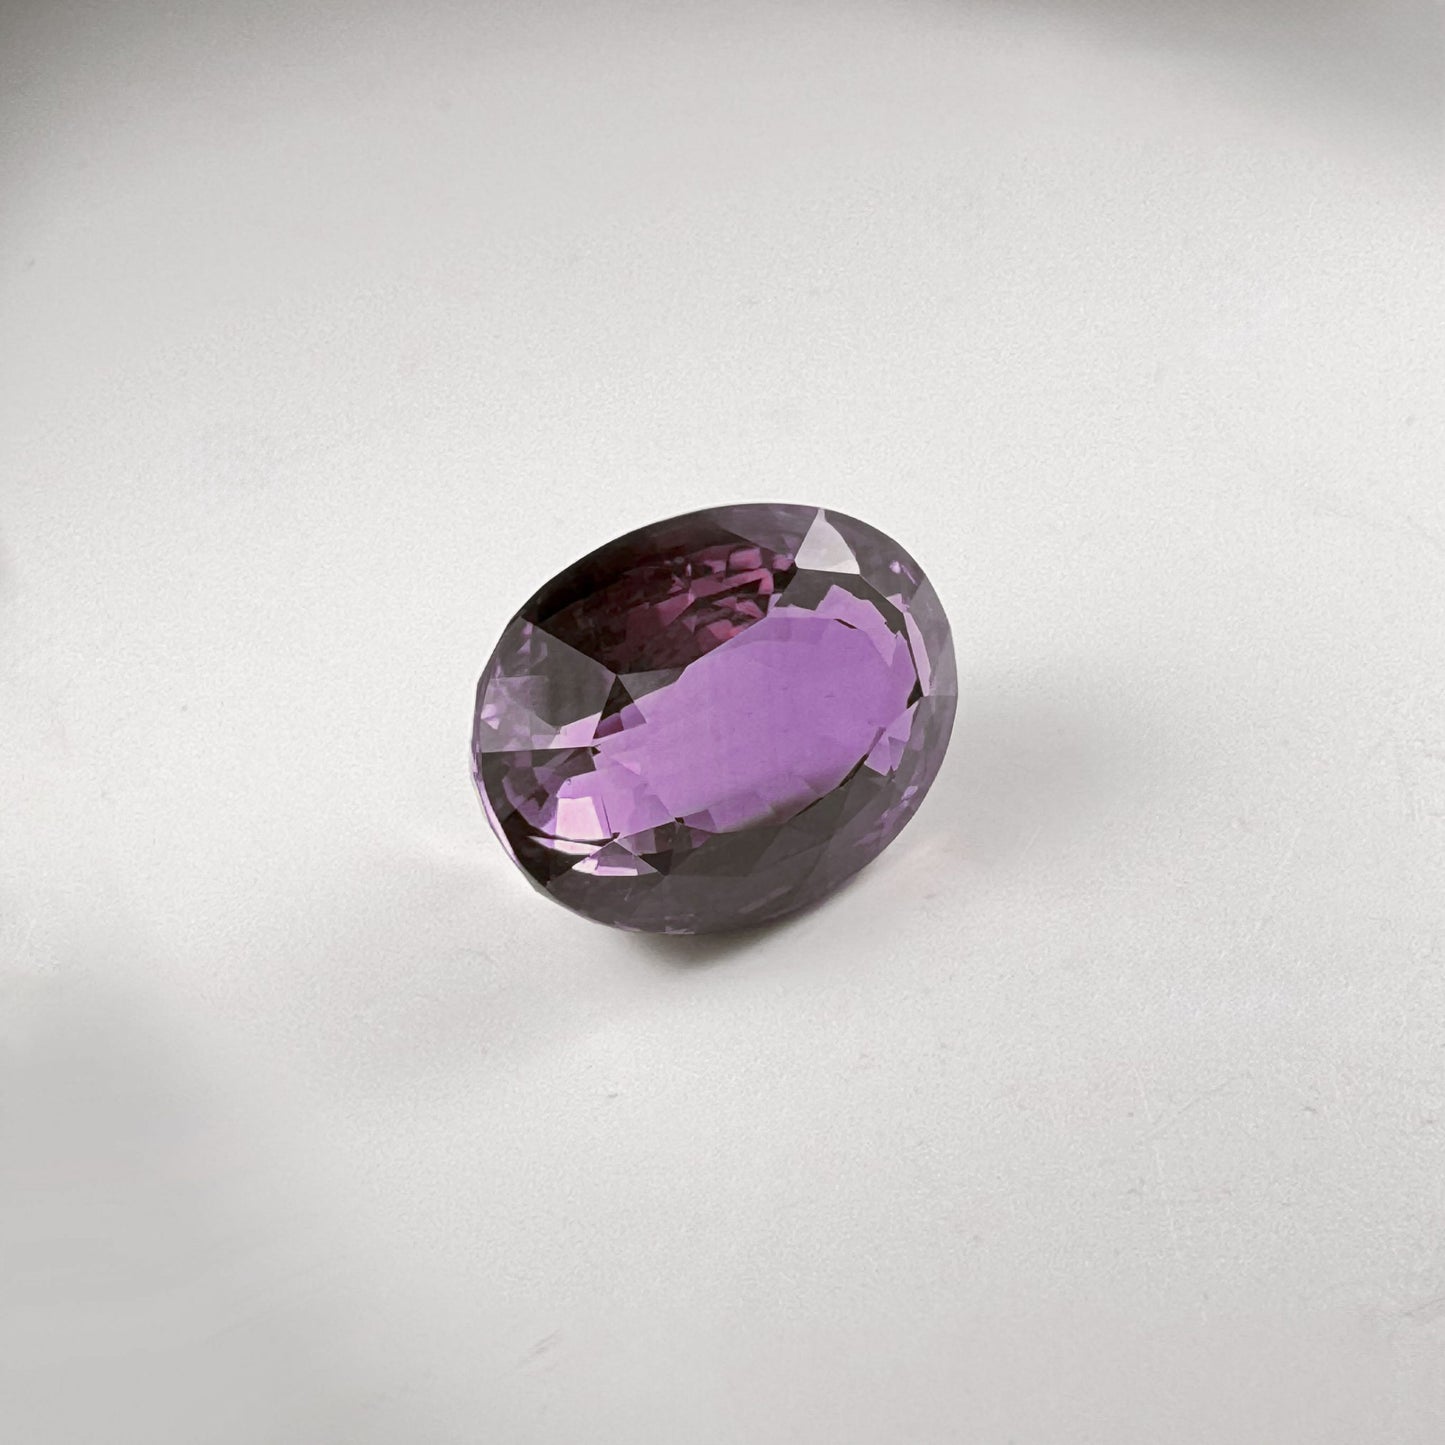 GIA Certified 9.85 Carat Natural Color Change Alexandrite